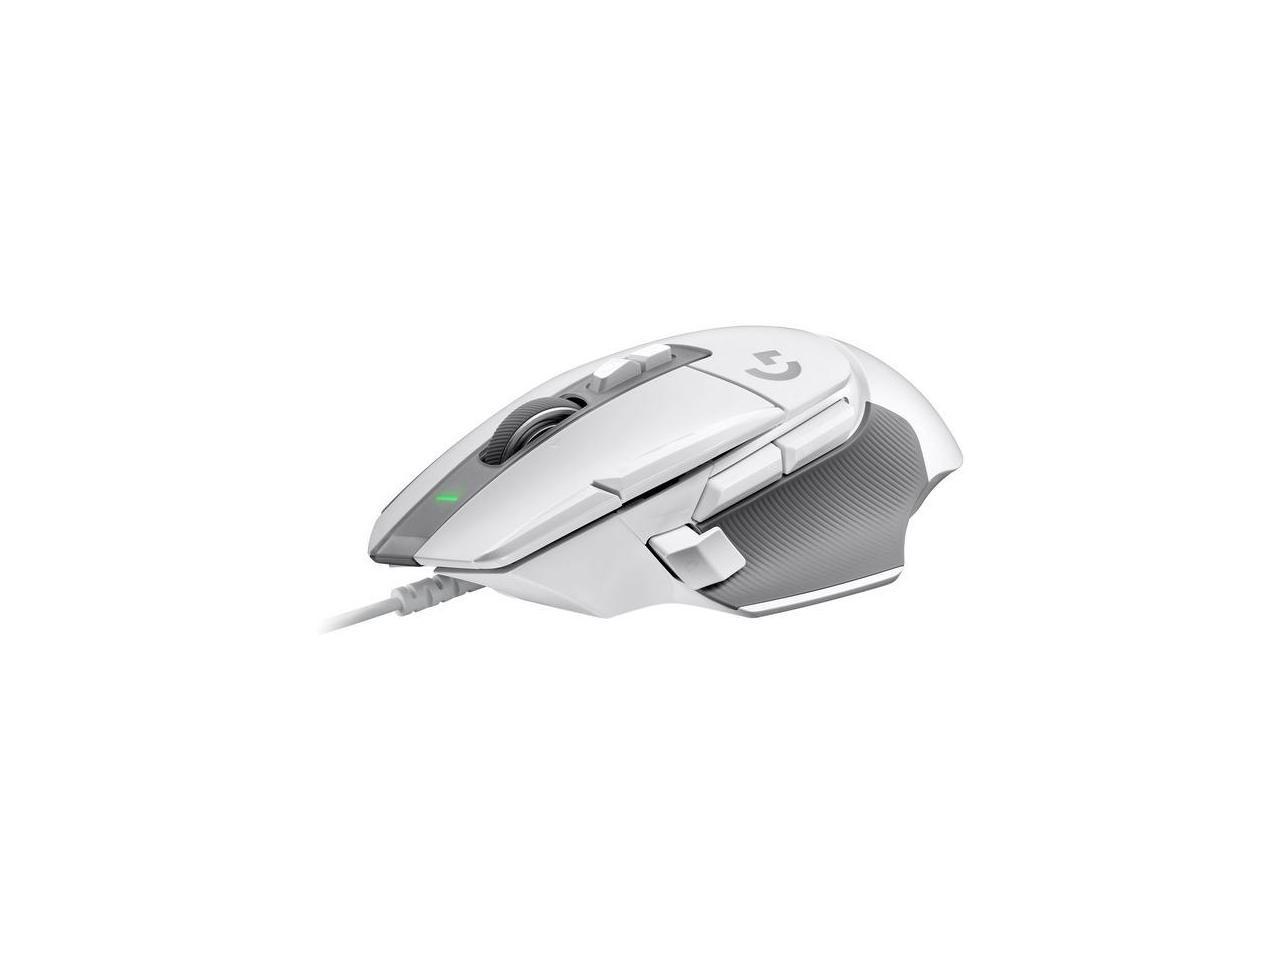 G502 X GAMING MOUSE WHITE